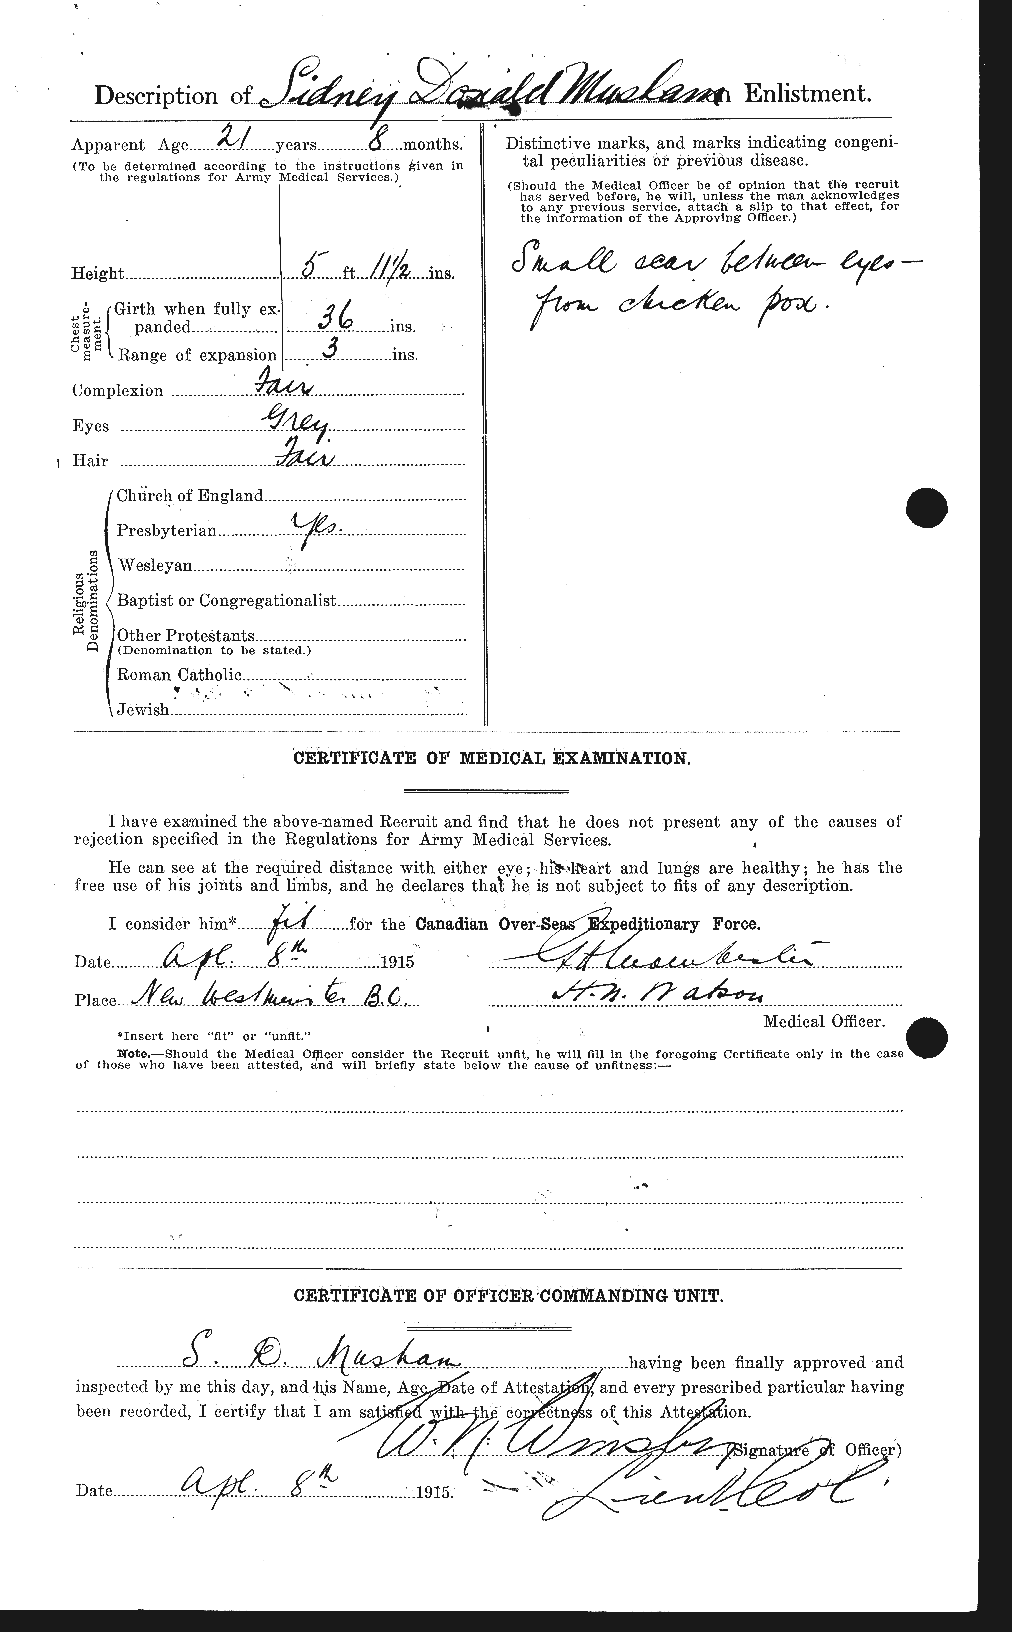 Personnel Records of the First World War - CEF 514977b